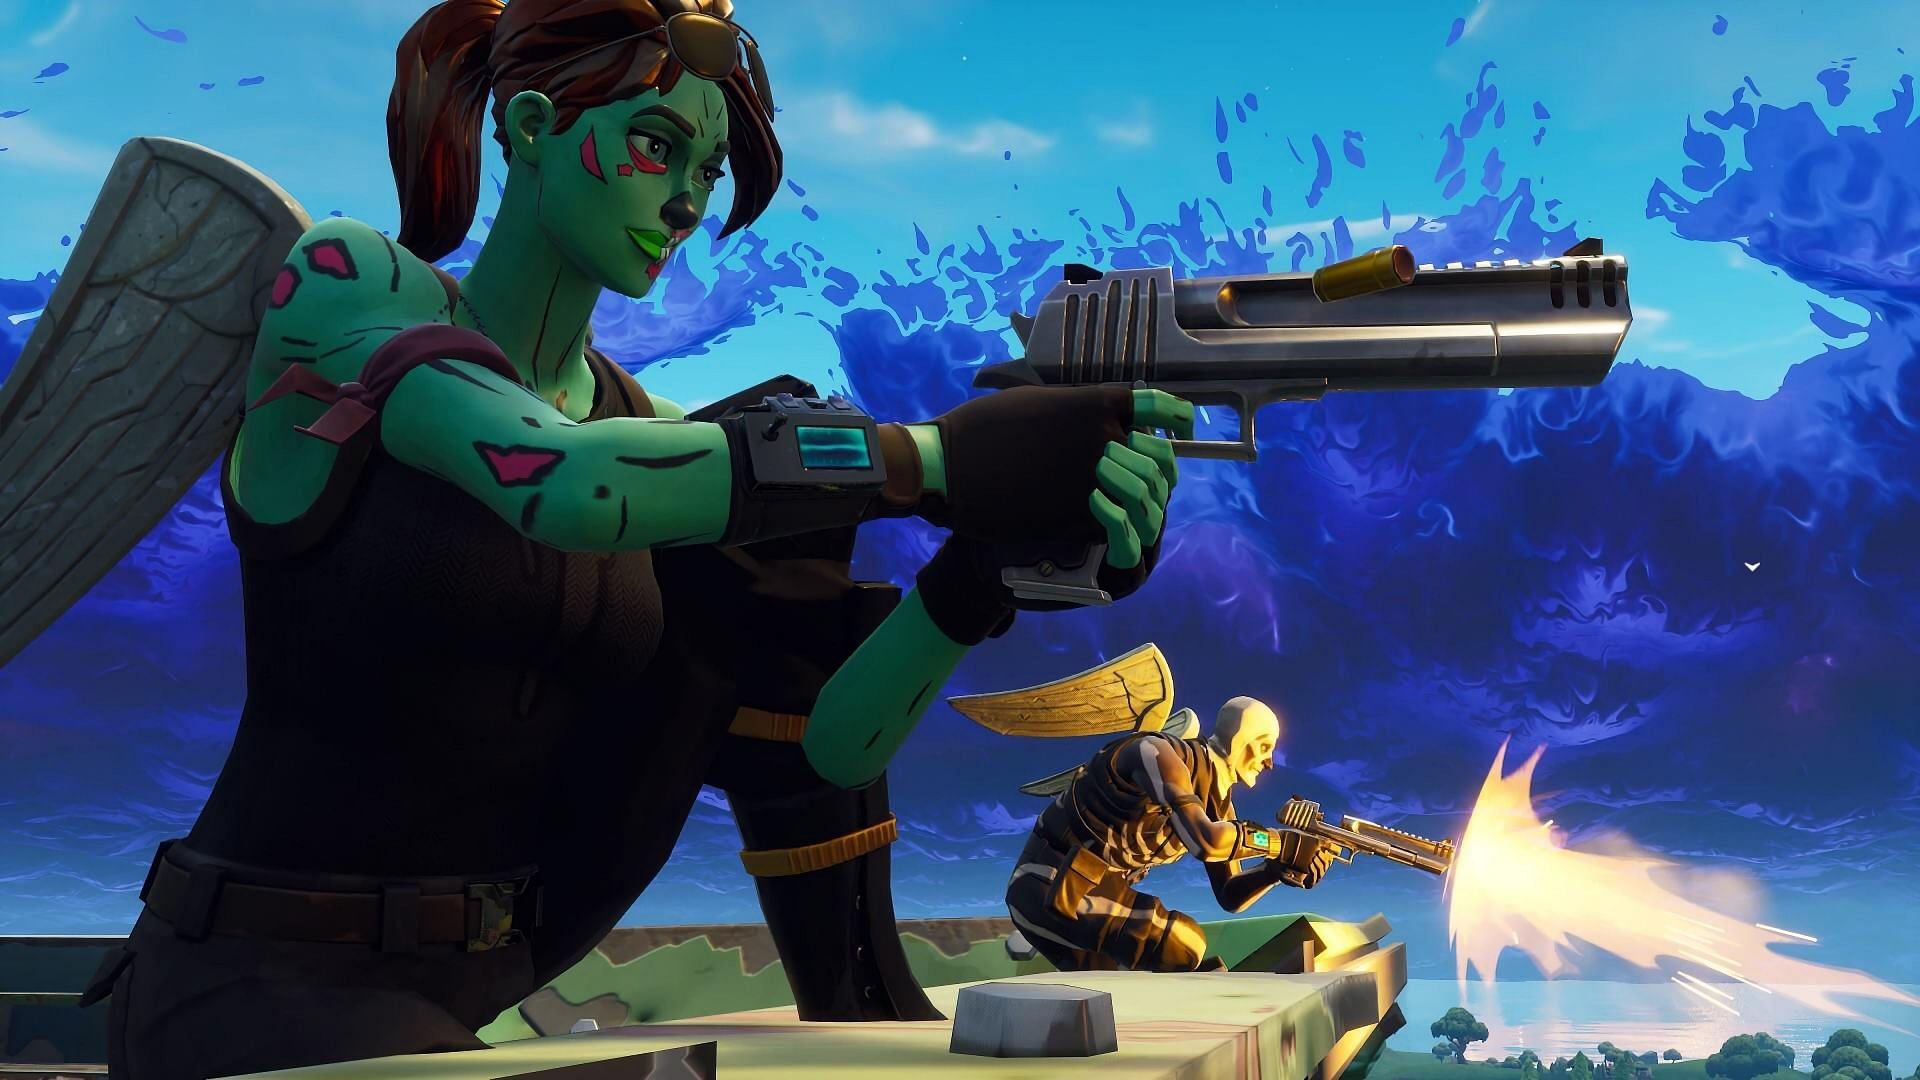 Ghoul Trooper is one of the most famous Fortnite skins of all time (Image via Epic Games)